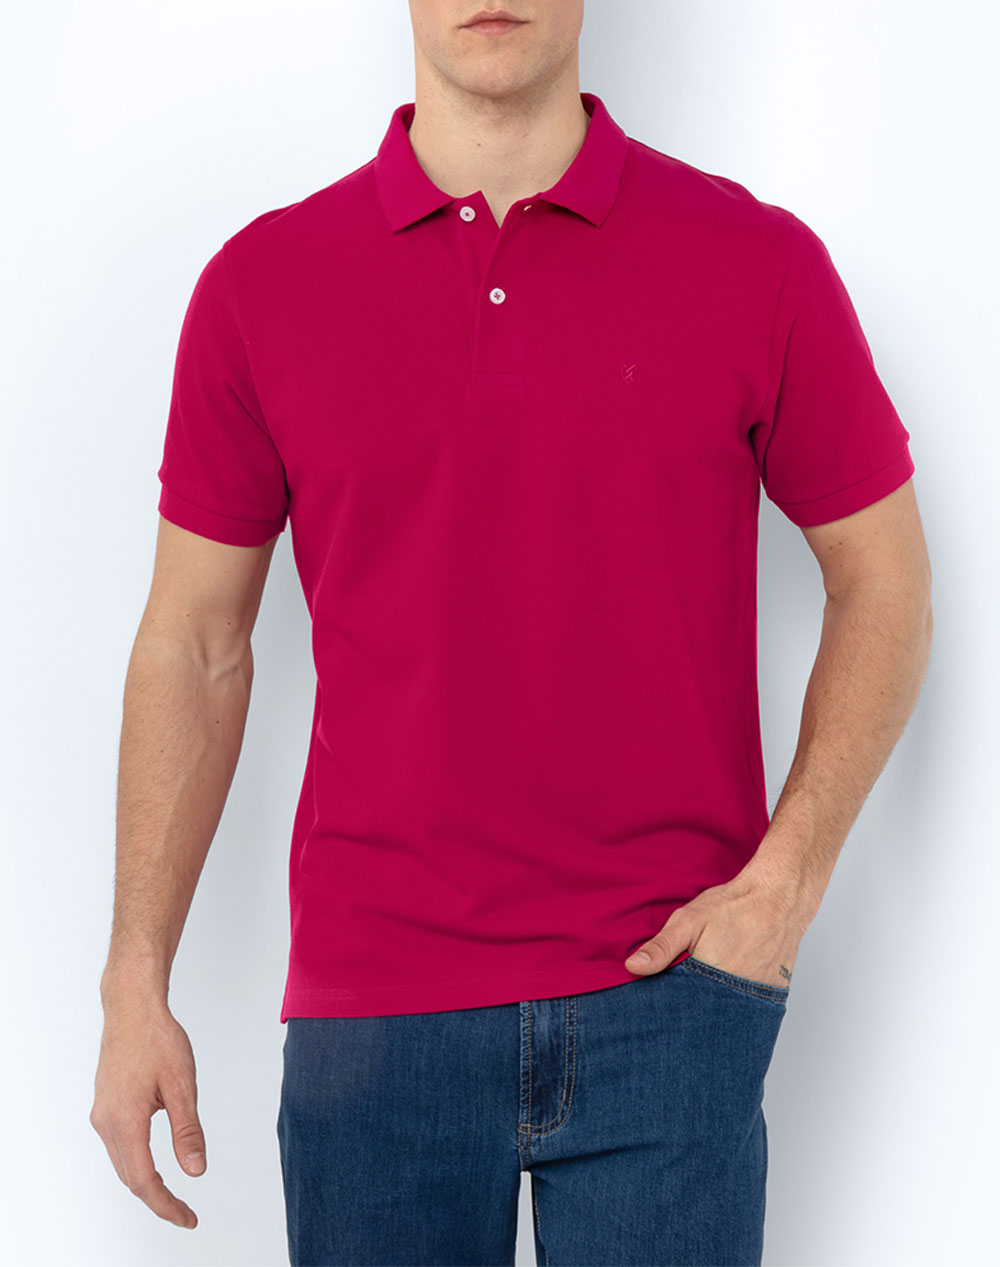 THE BOSTONIANS ΜΠΛΟΥΖΑ POLO PIQUE REGULAR FIT 3PS0001-MAJESTIC Magenta 3820ABOST3410092_XR30400